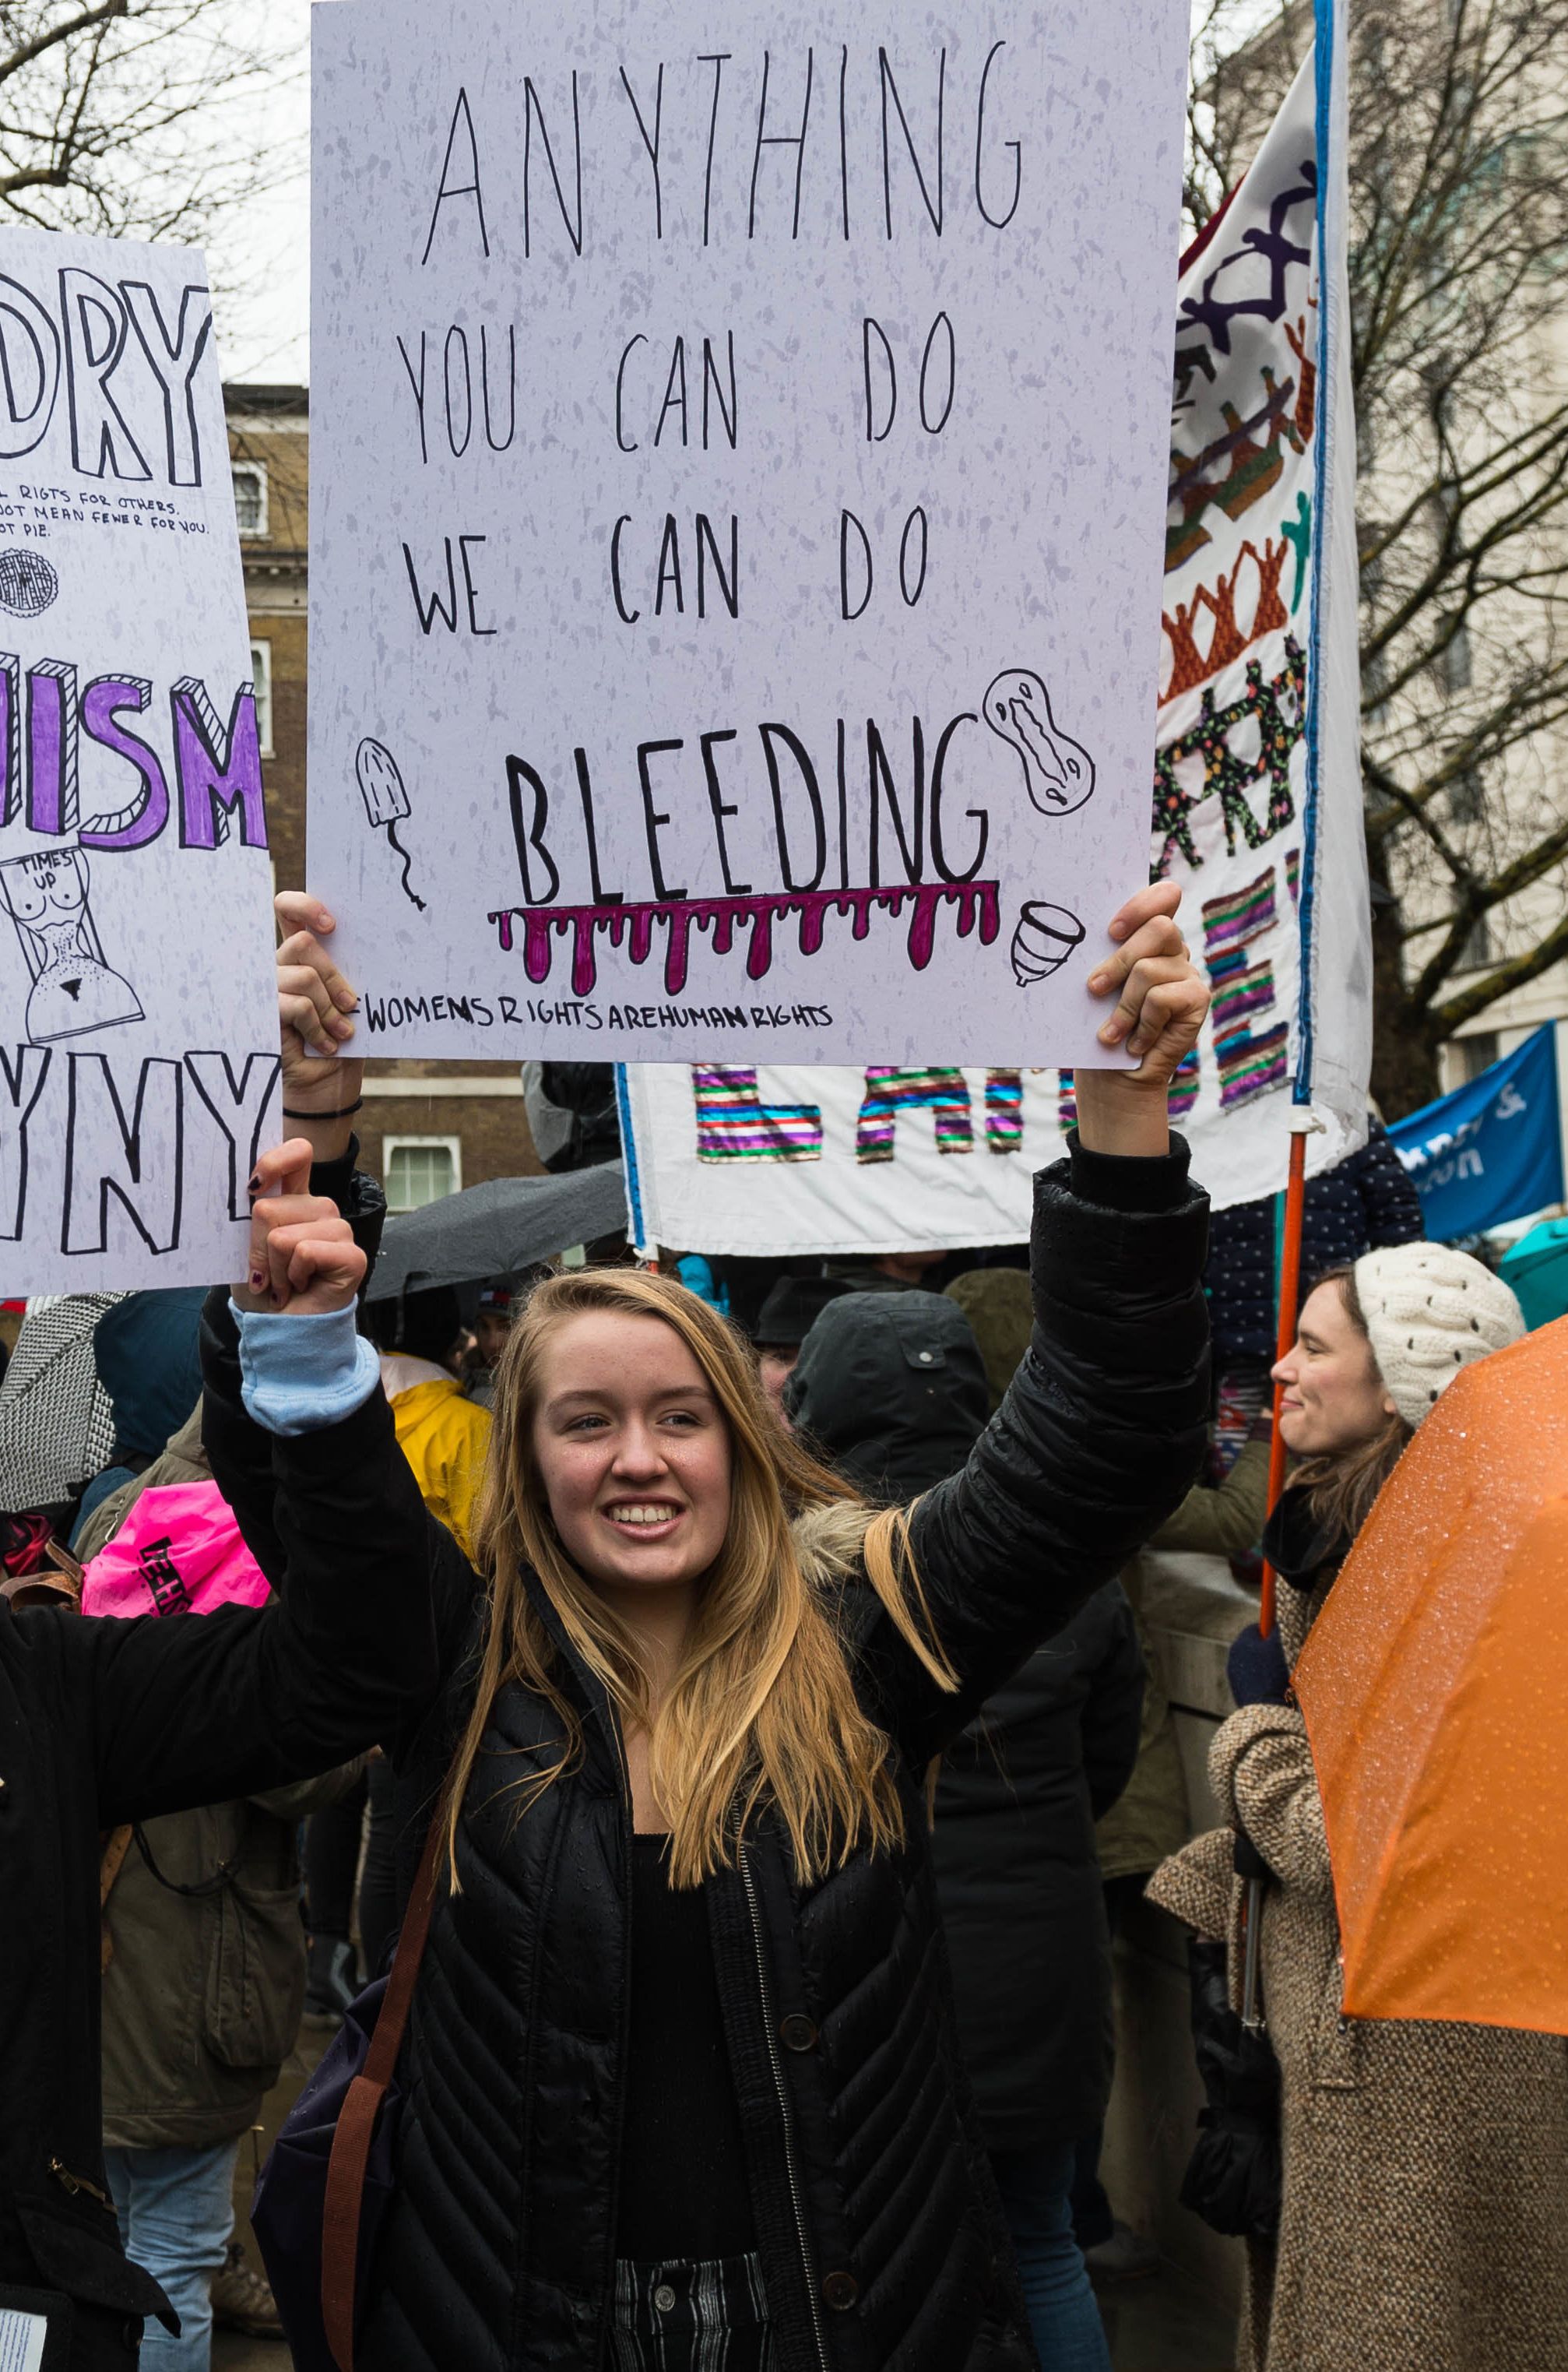 25 Of The Best Signs From The 'Time’s Up' Women's March In London ...